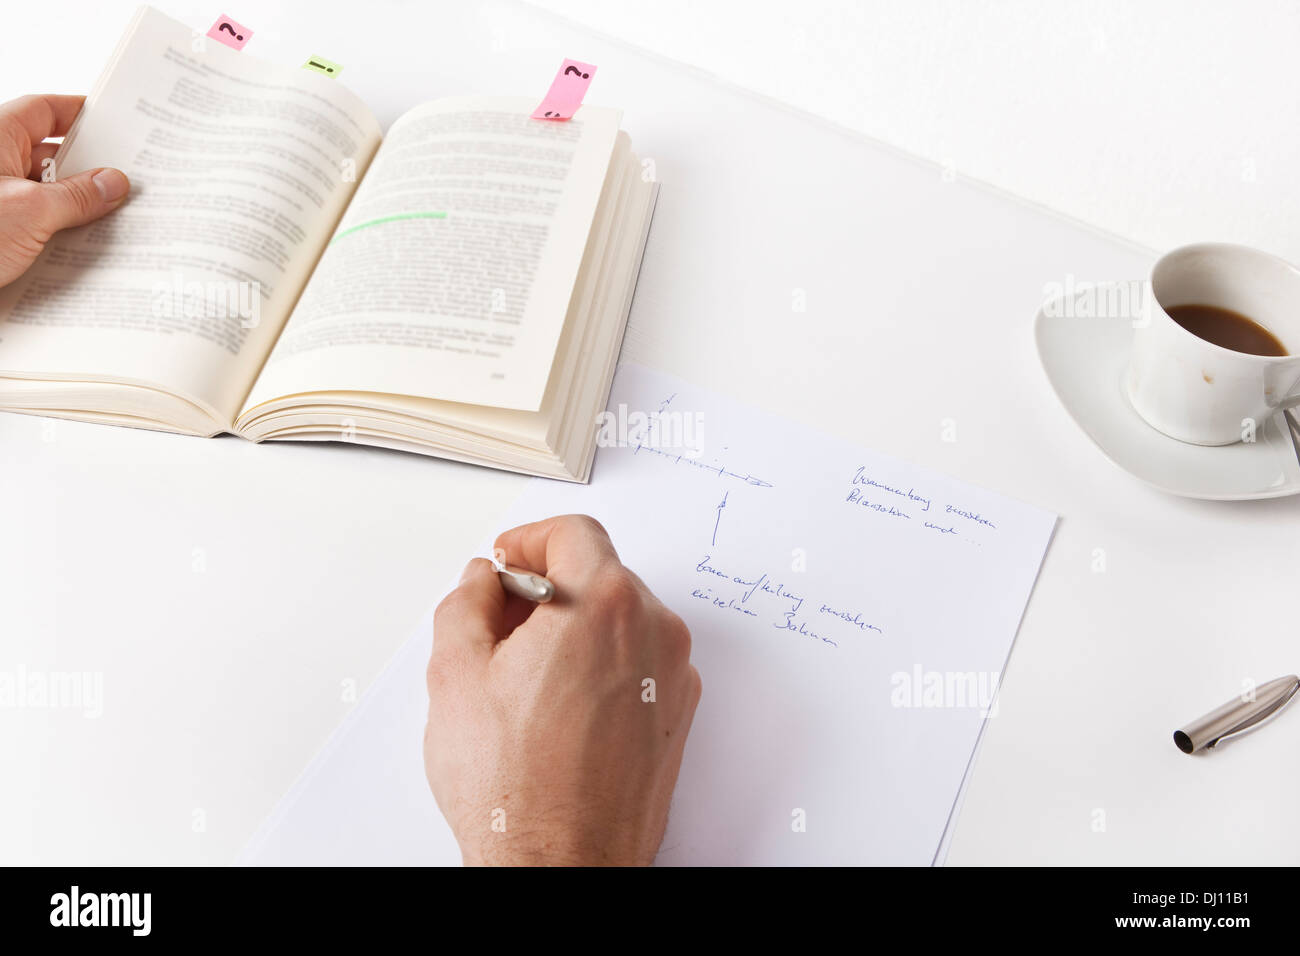 Write notes from a book, only the hands are seen, no face Stock Photo